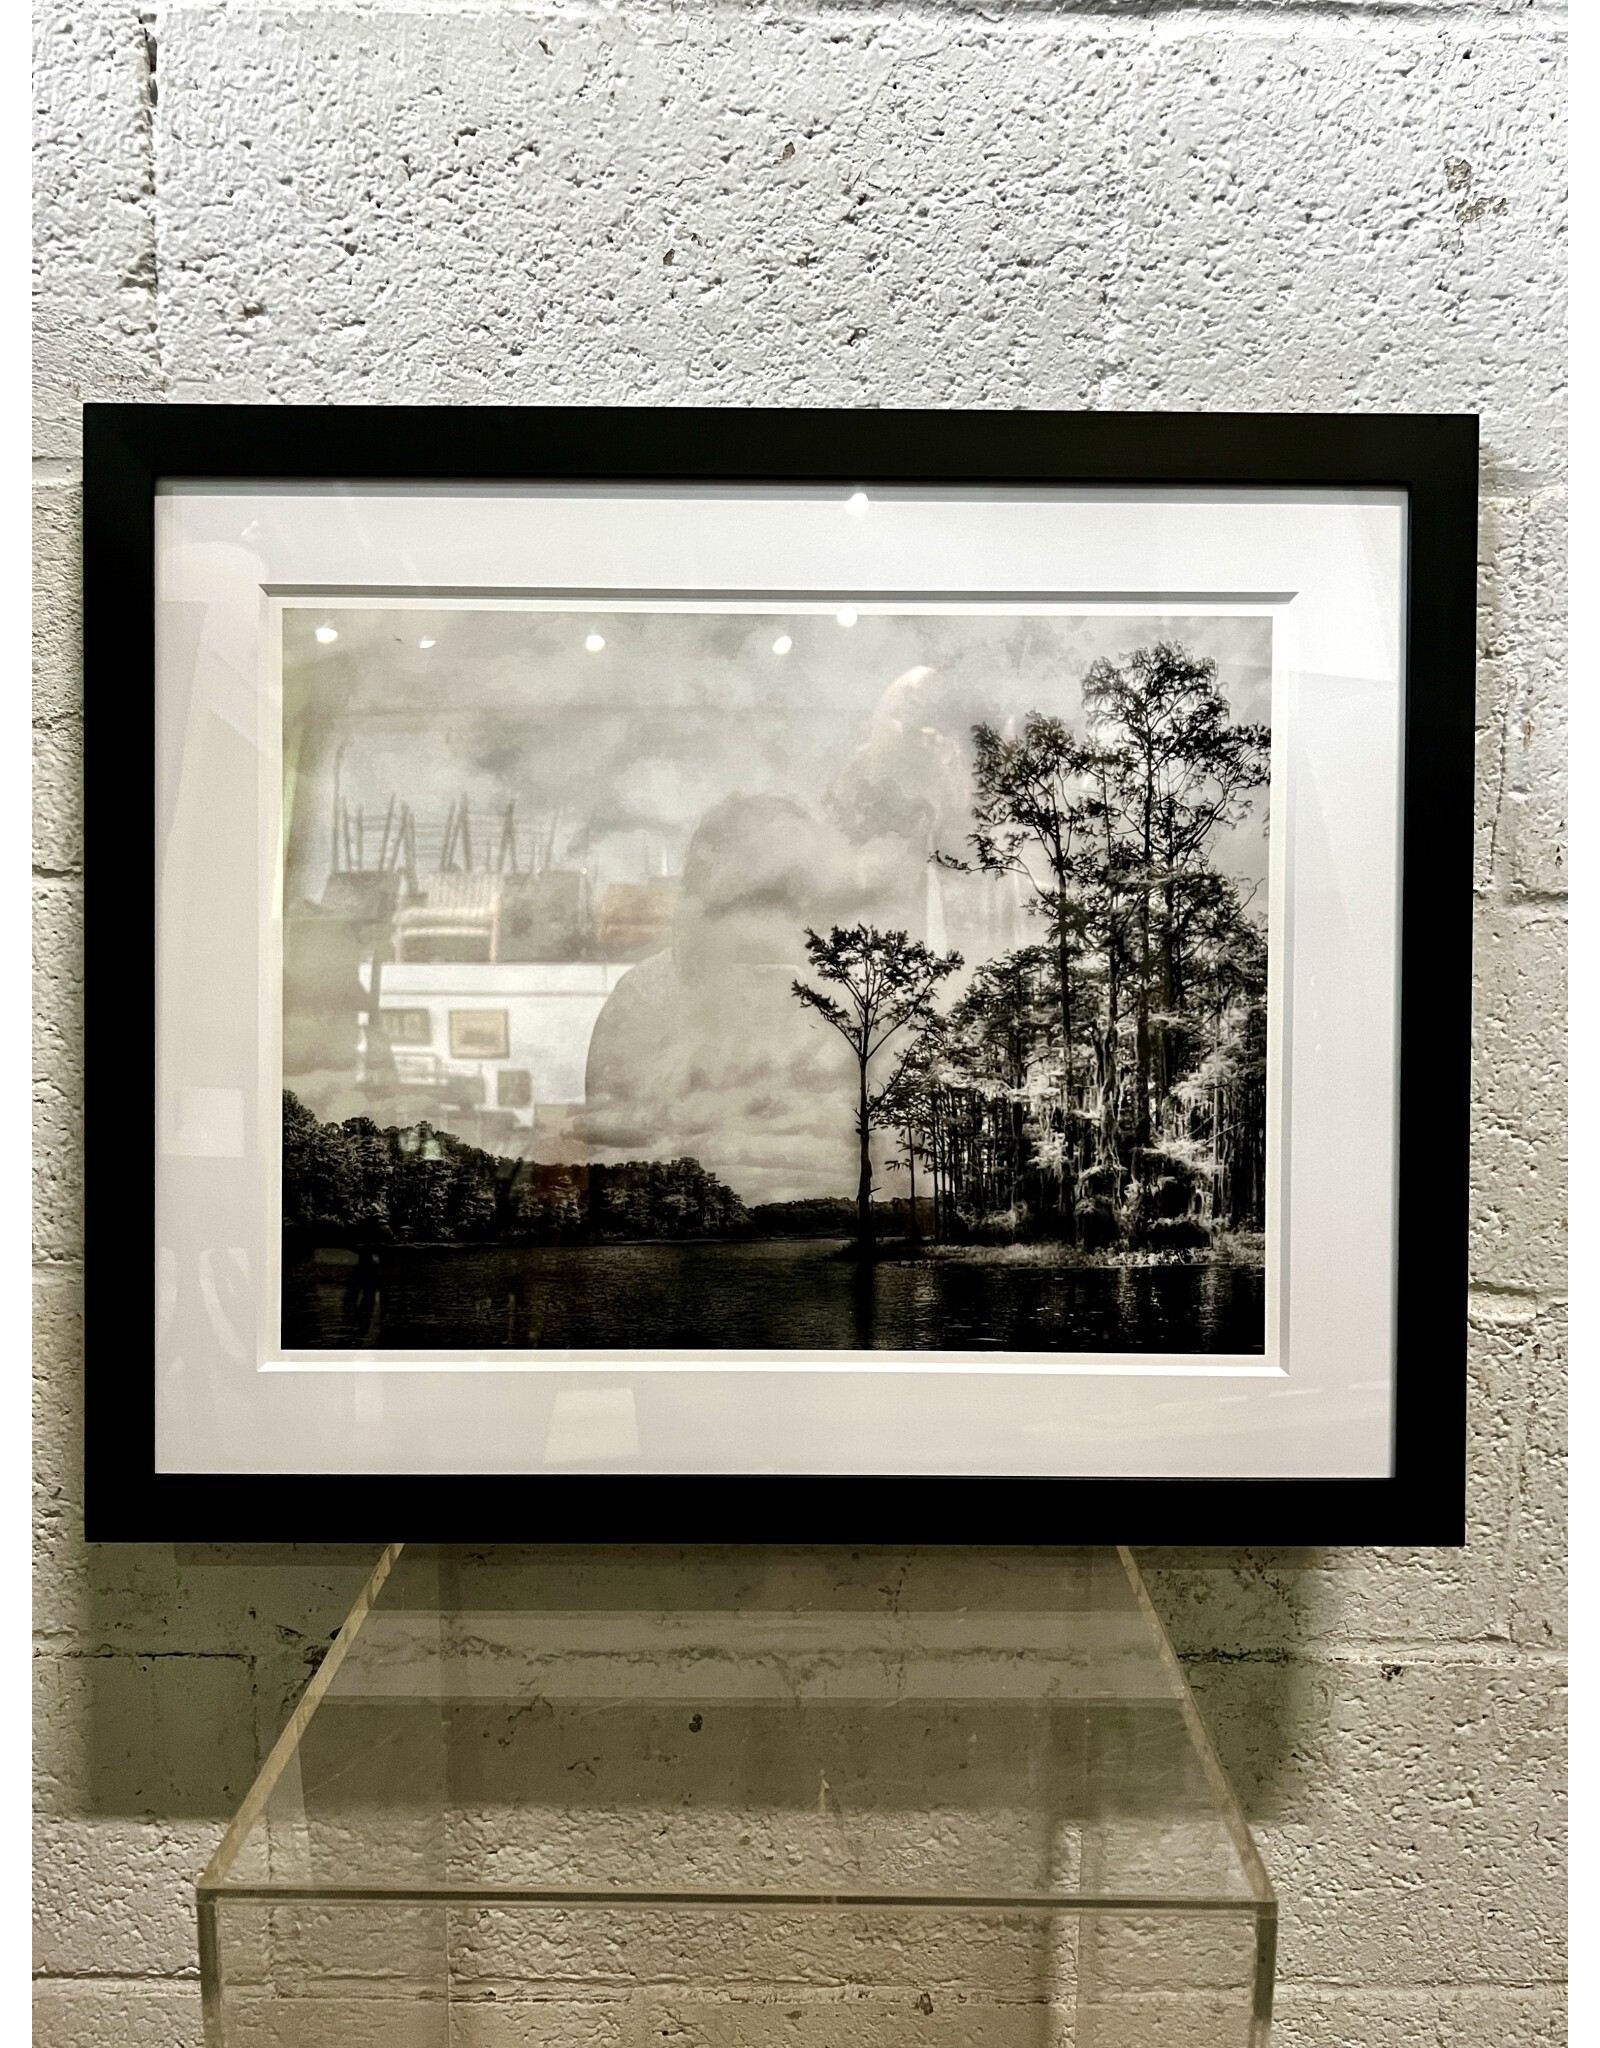 Down the Highway, framed photograph